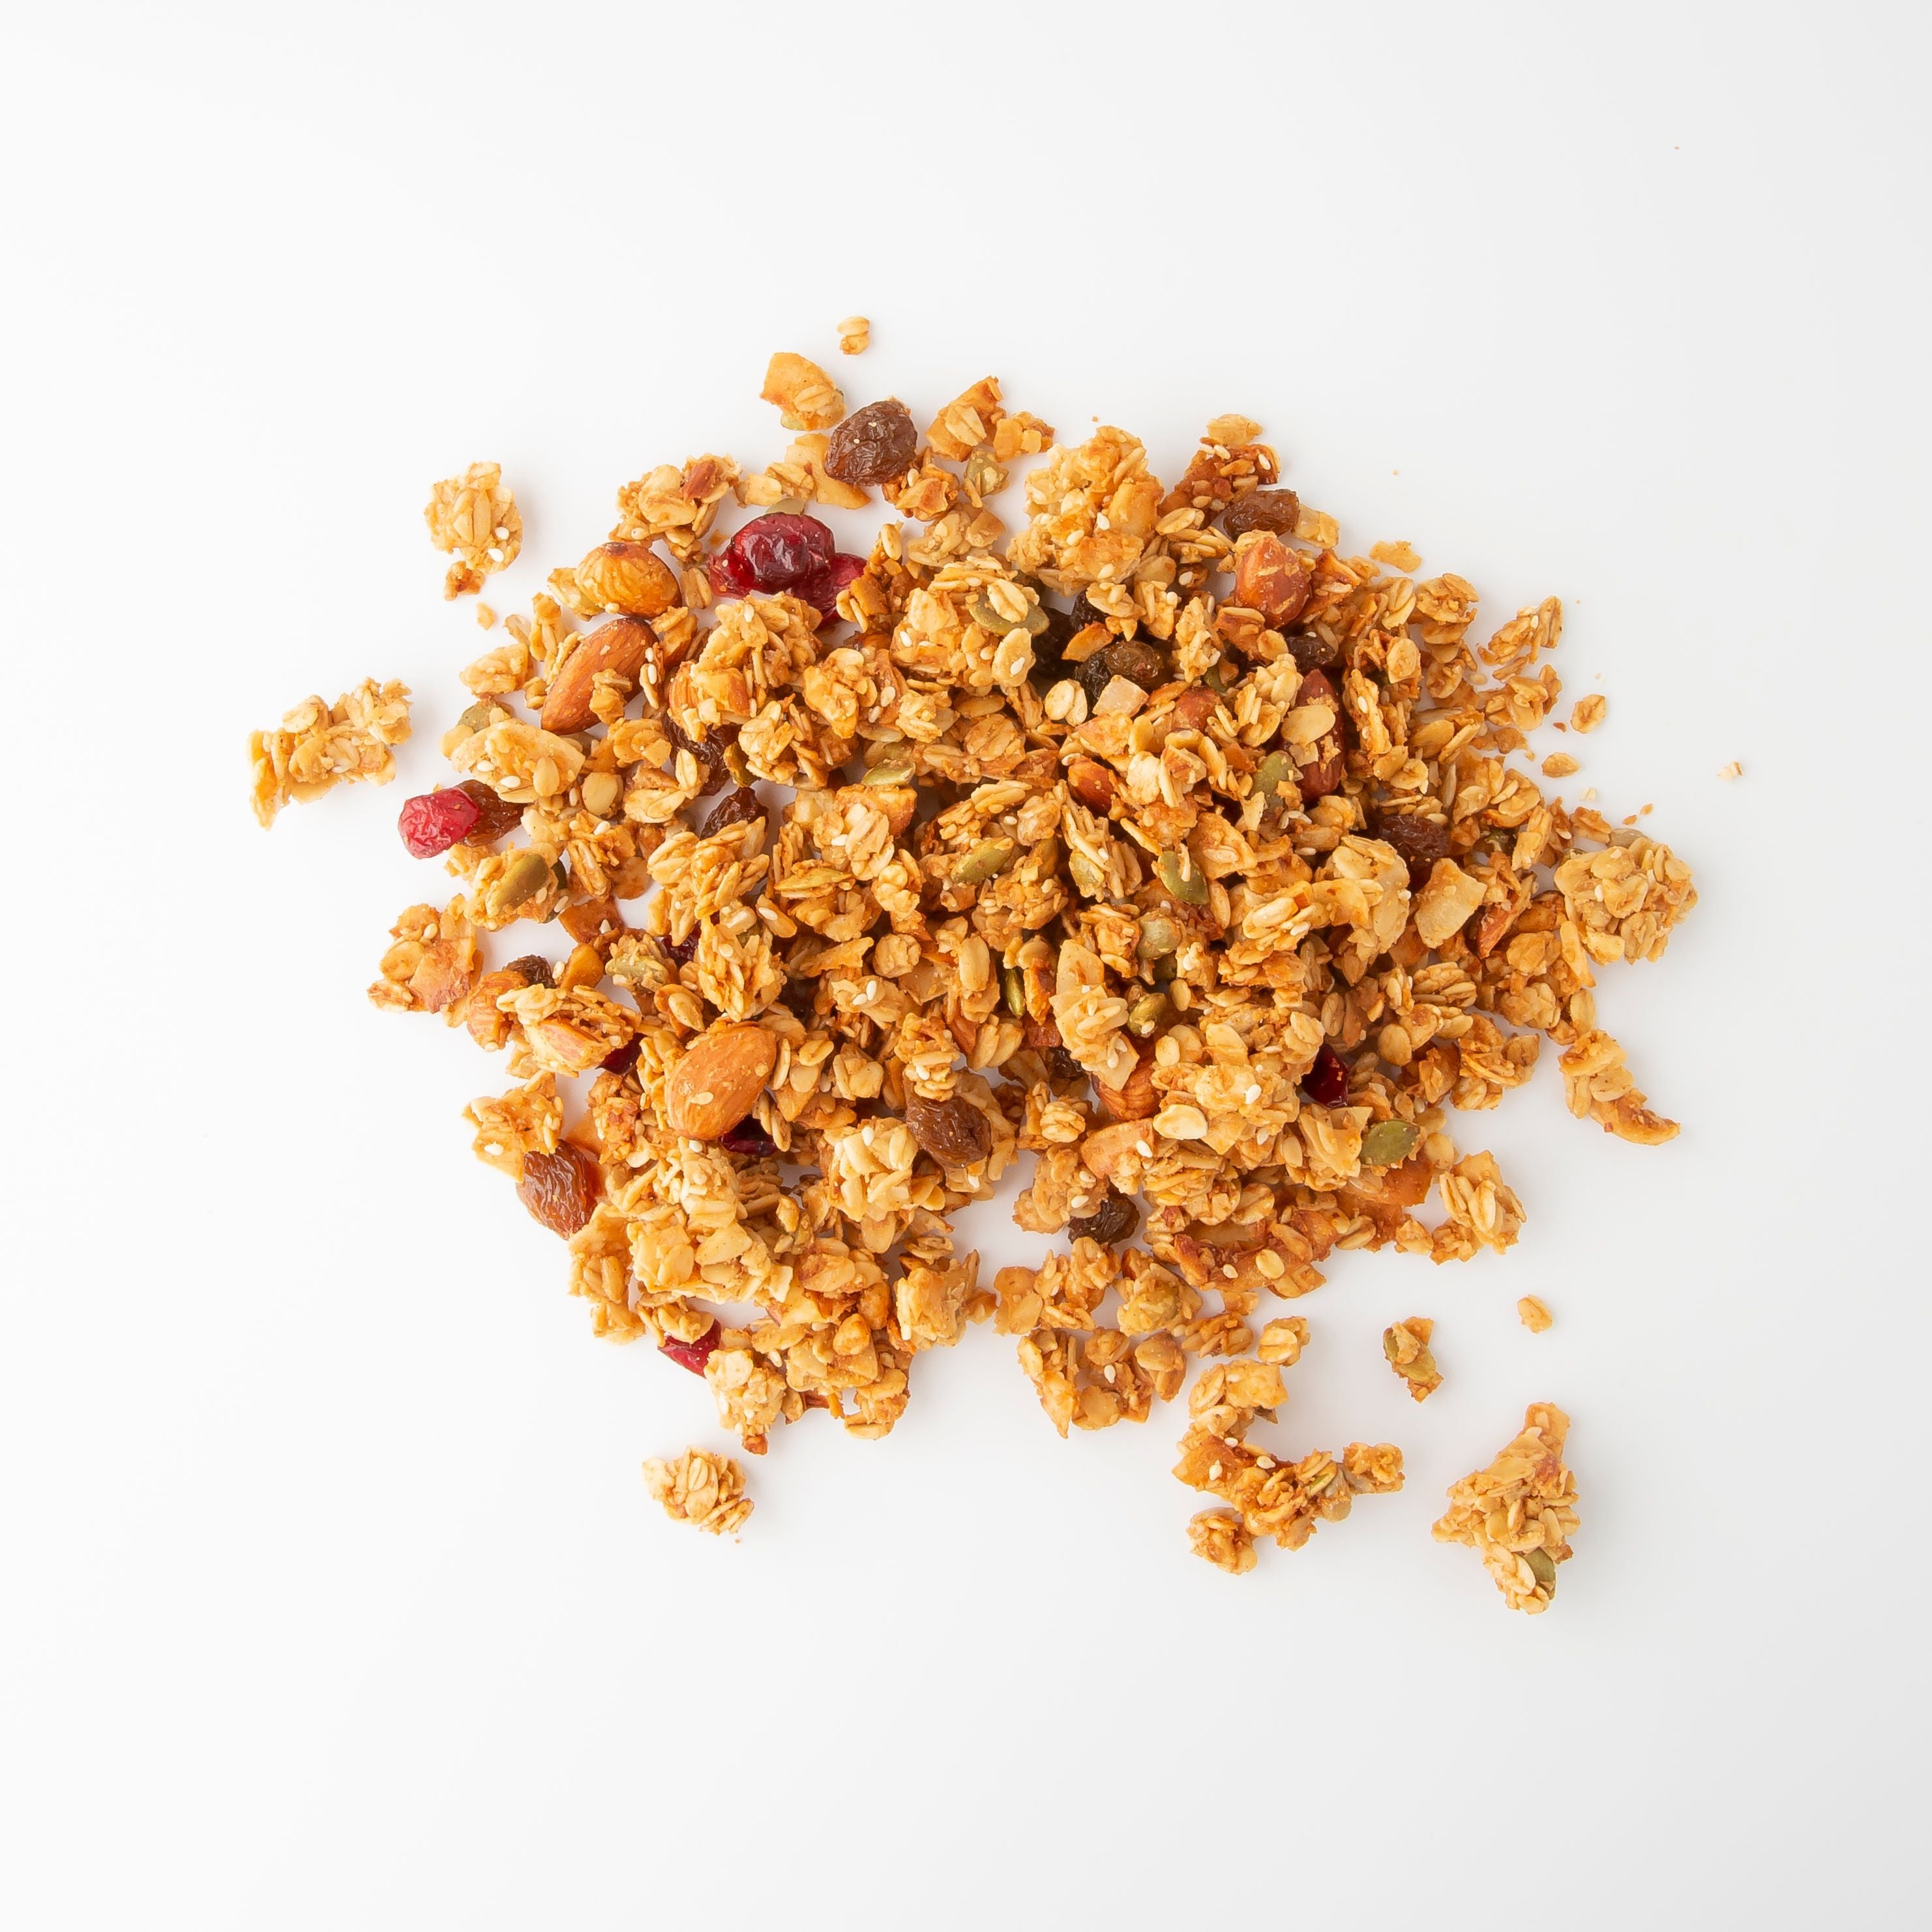 Fruit and Nut Granola (Cereals) Image - Naked Foods